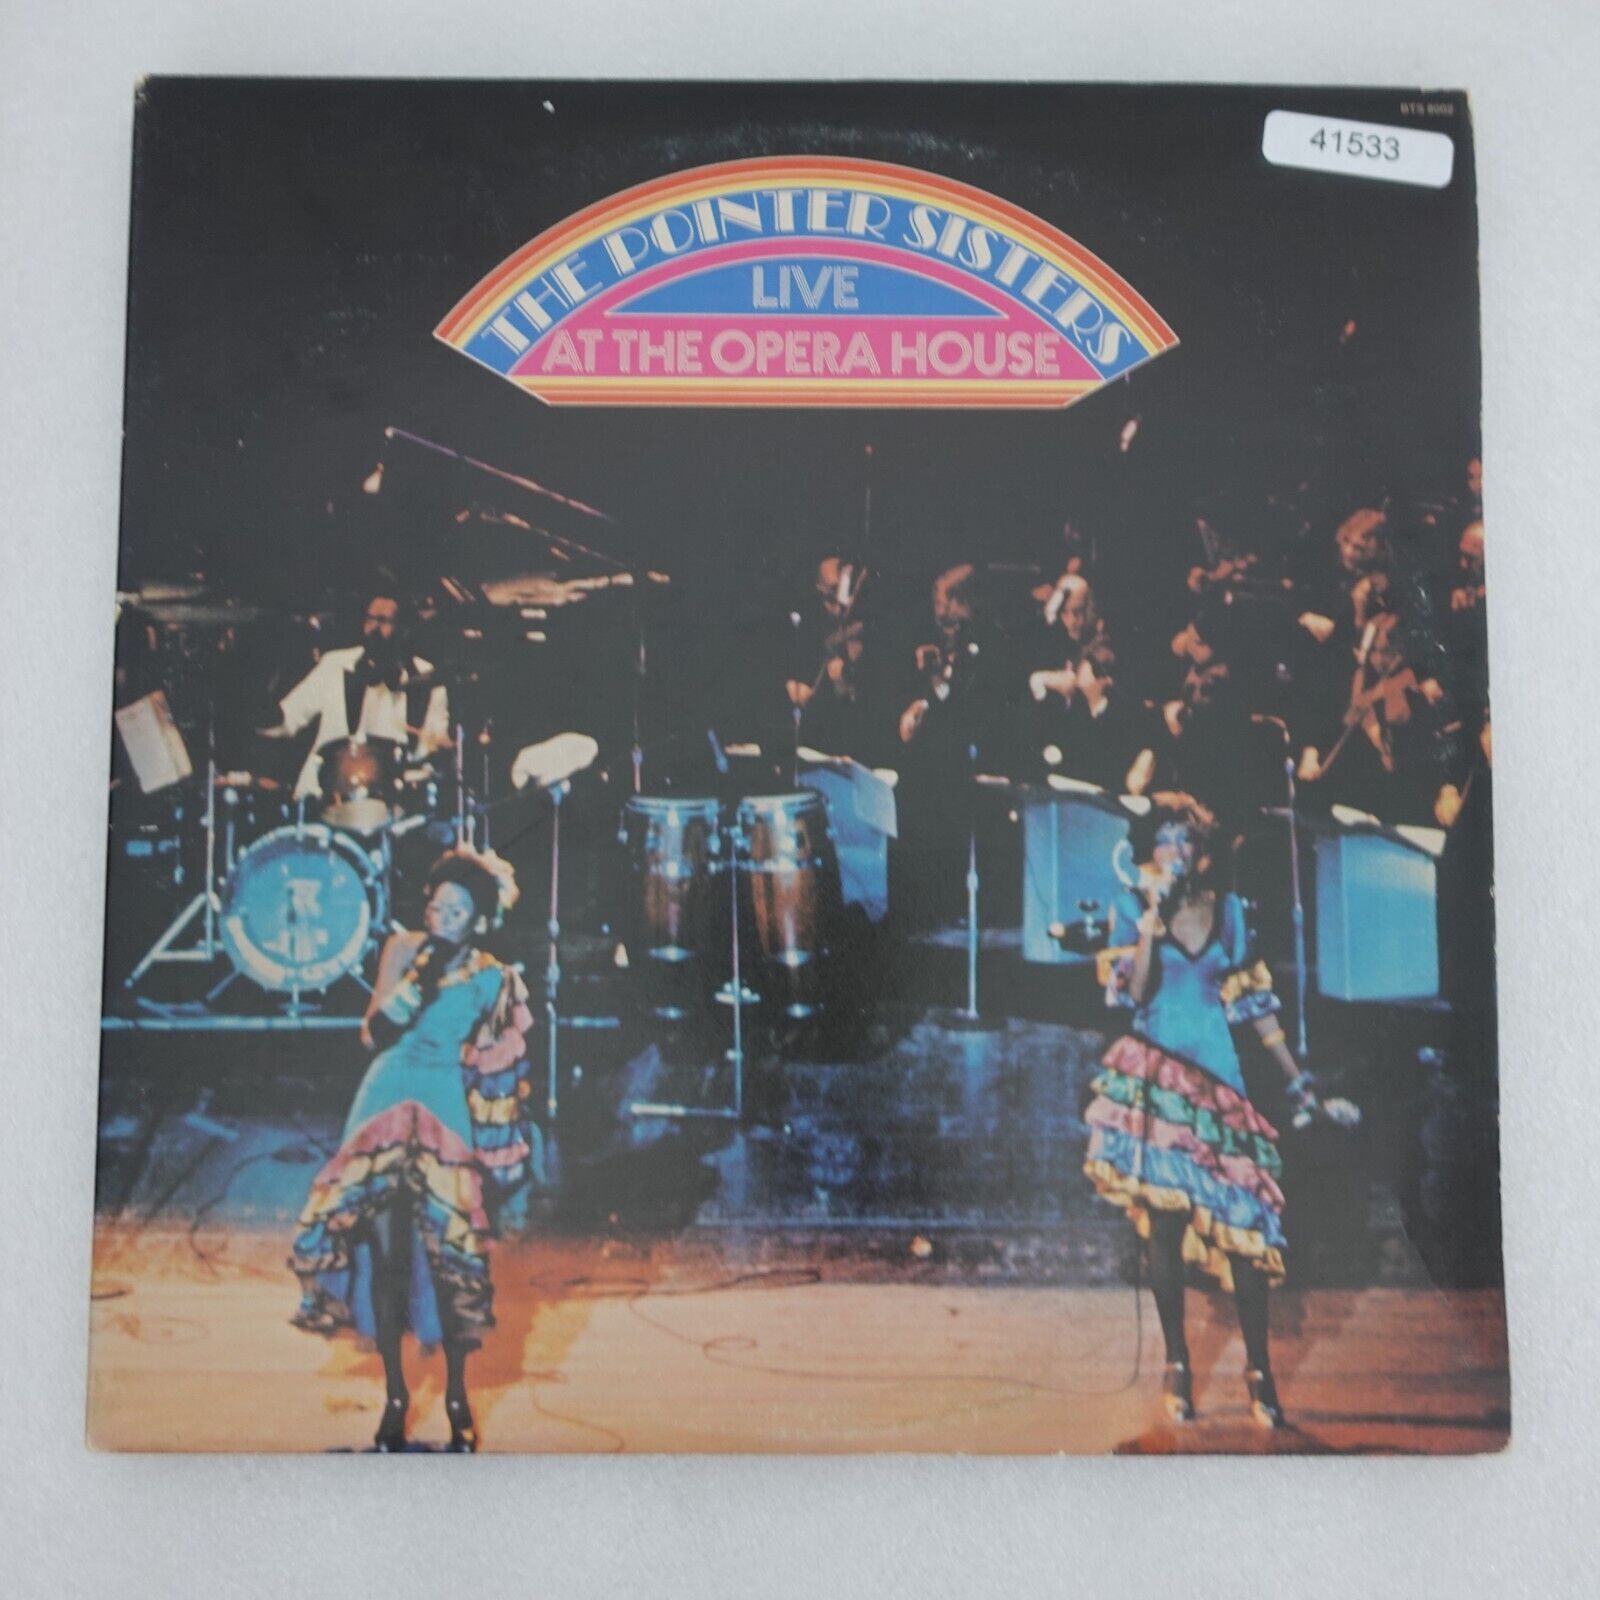 The Pointer Sisters Live At The Opera House LP Vinyl Record Album